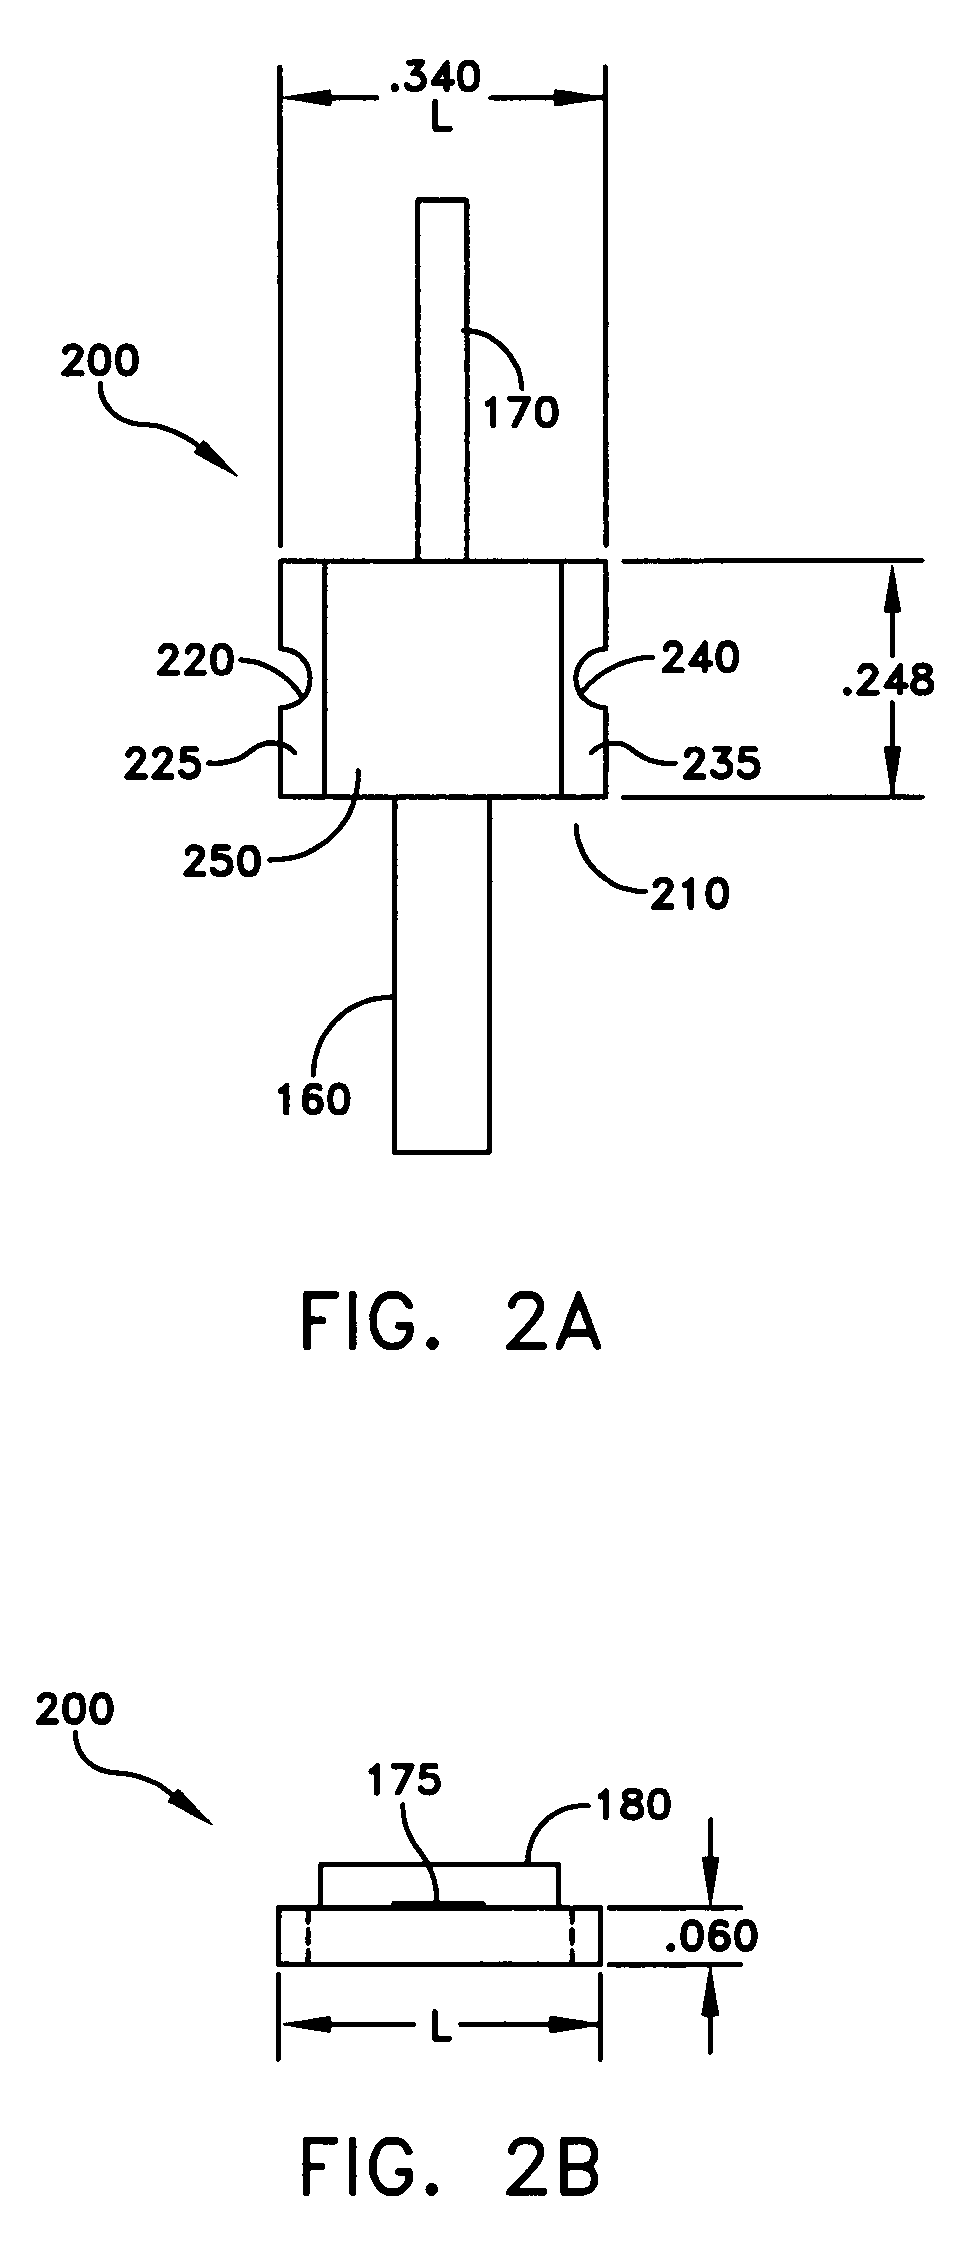 Electronic device package heat sink assembly